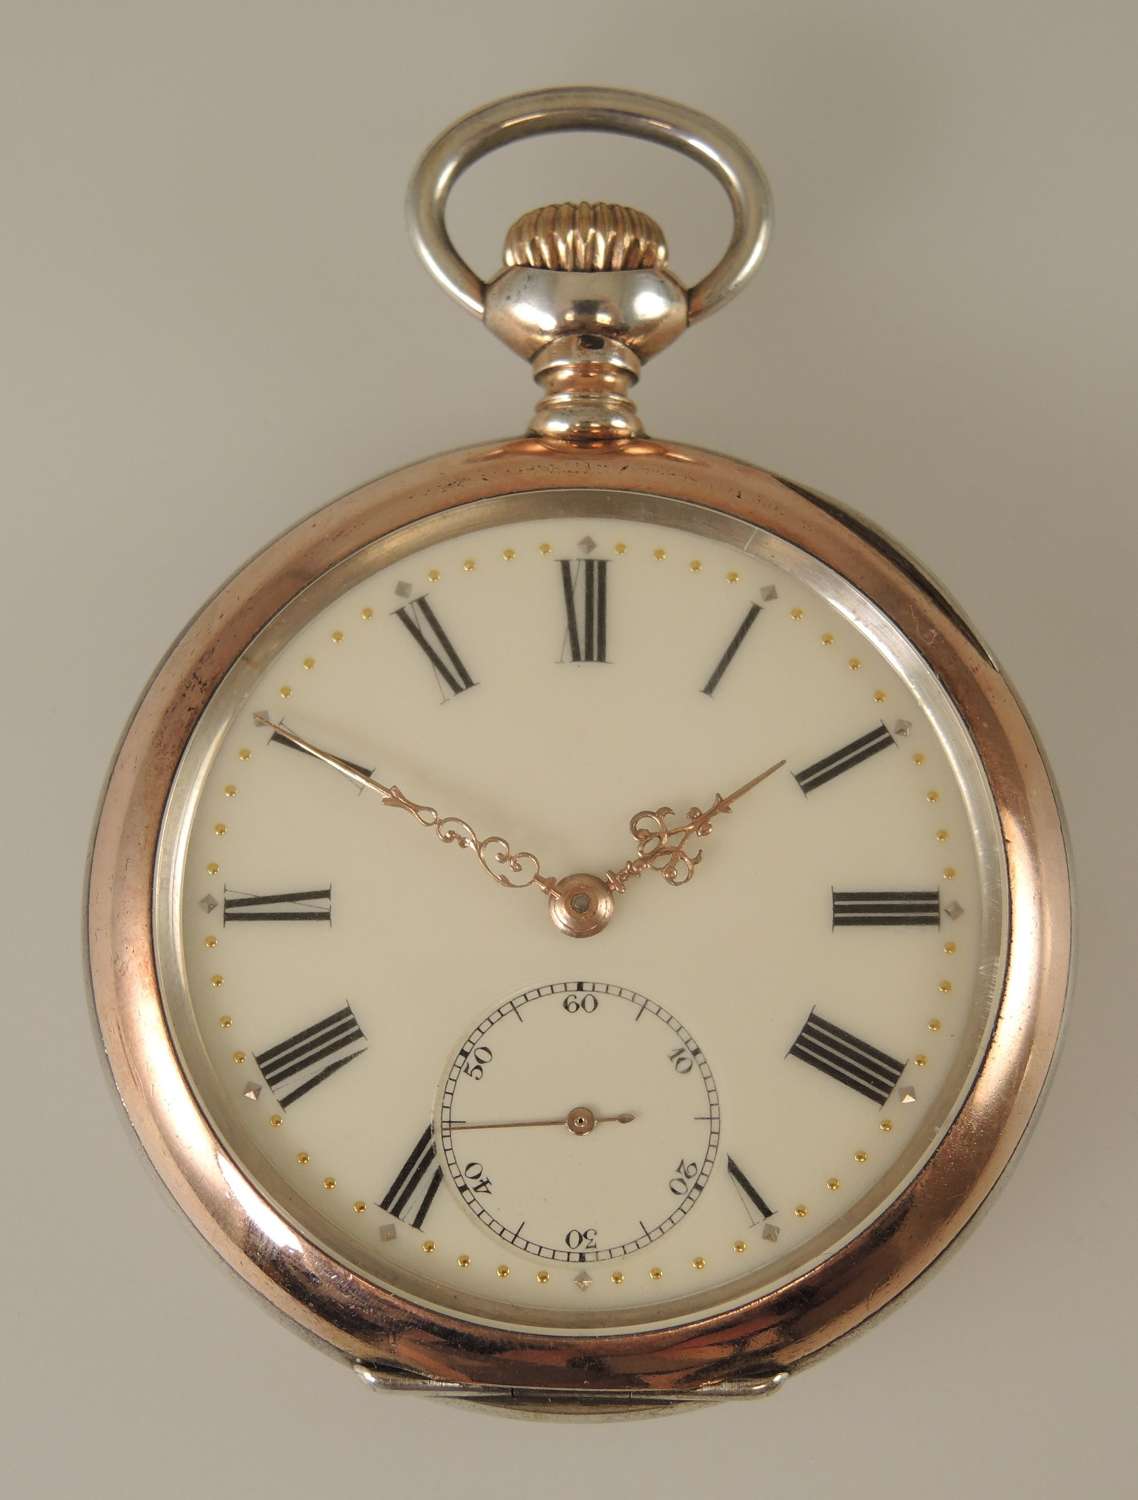 Silver and gold cased ZENITH vintage pocket watch c1910